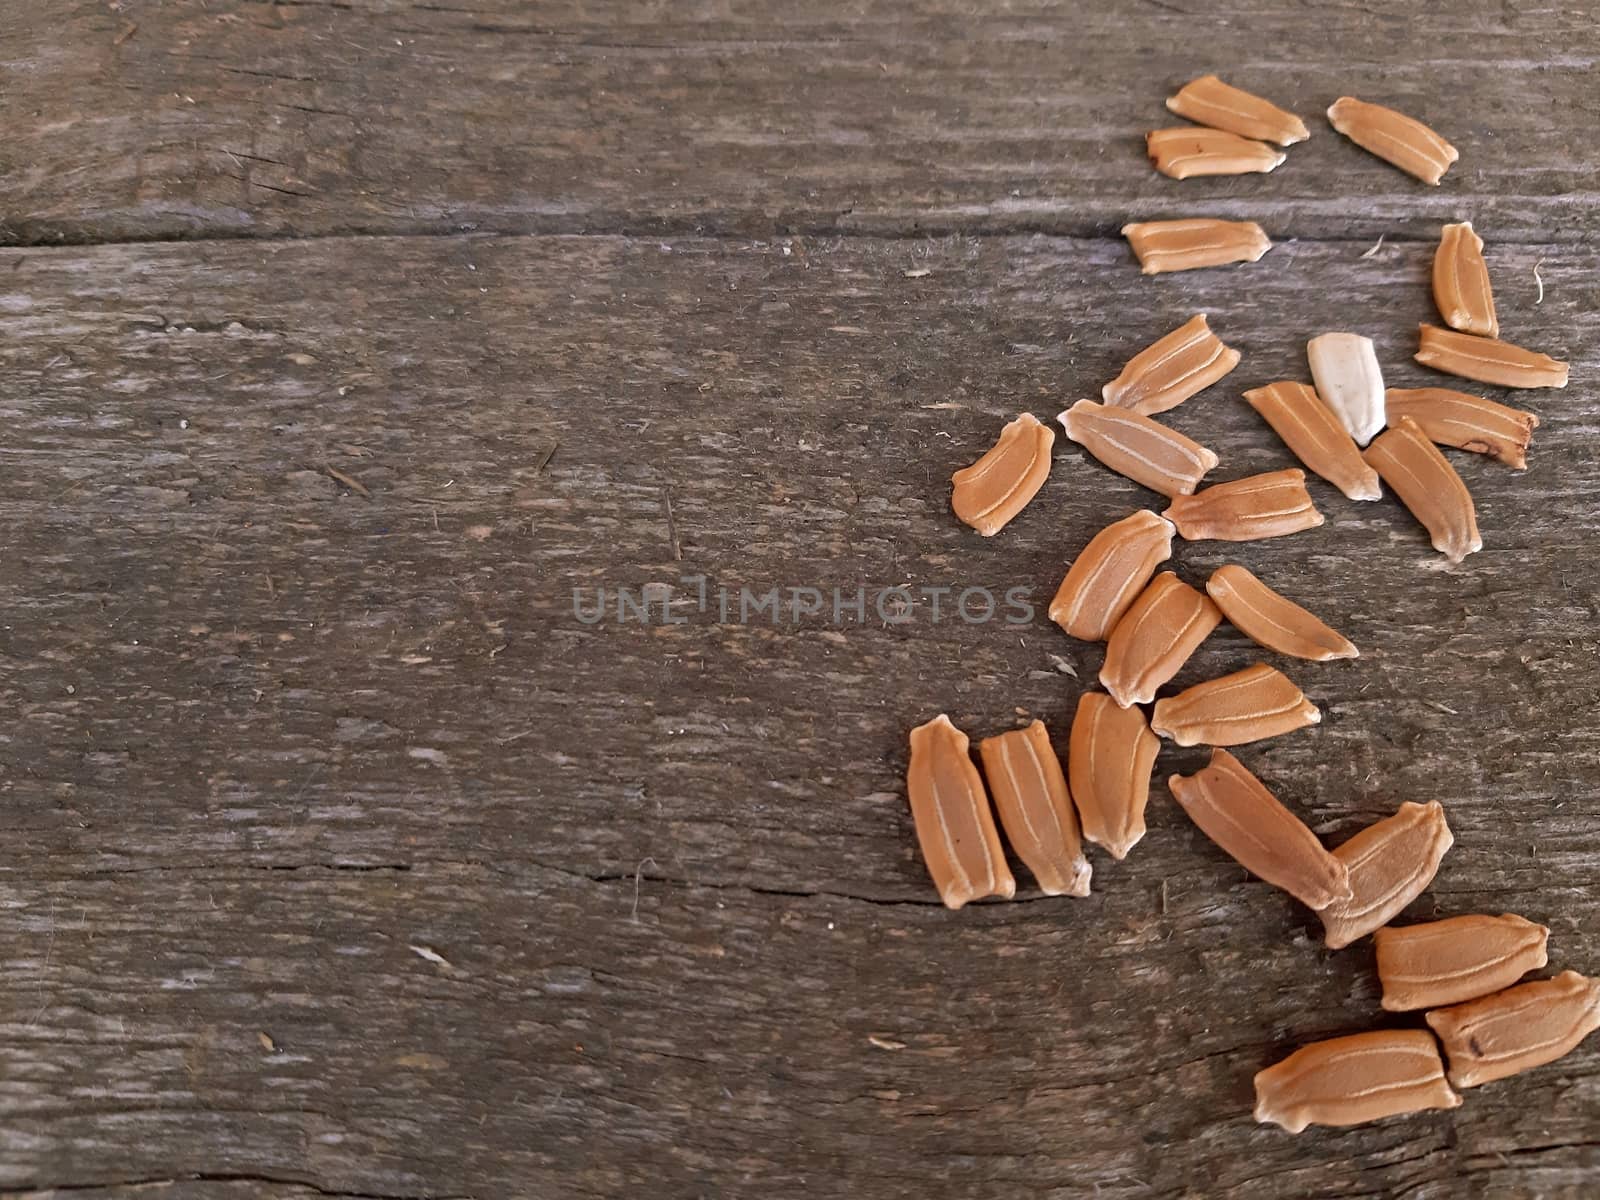 Some seeds on wooden background with Copy space.